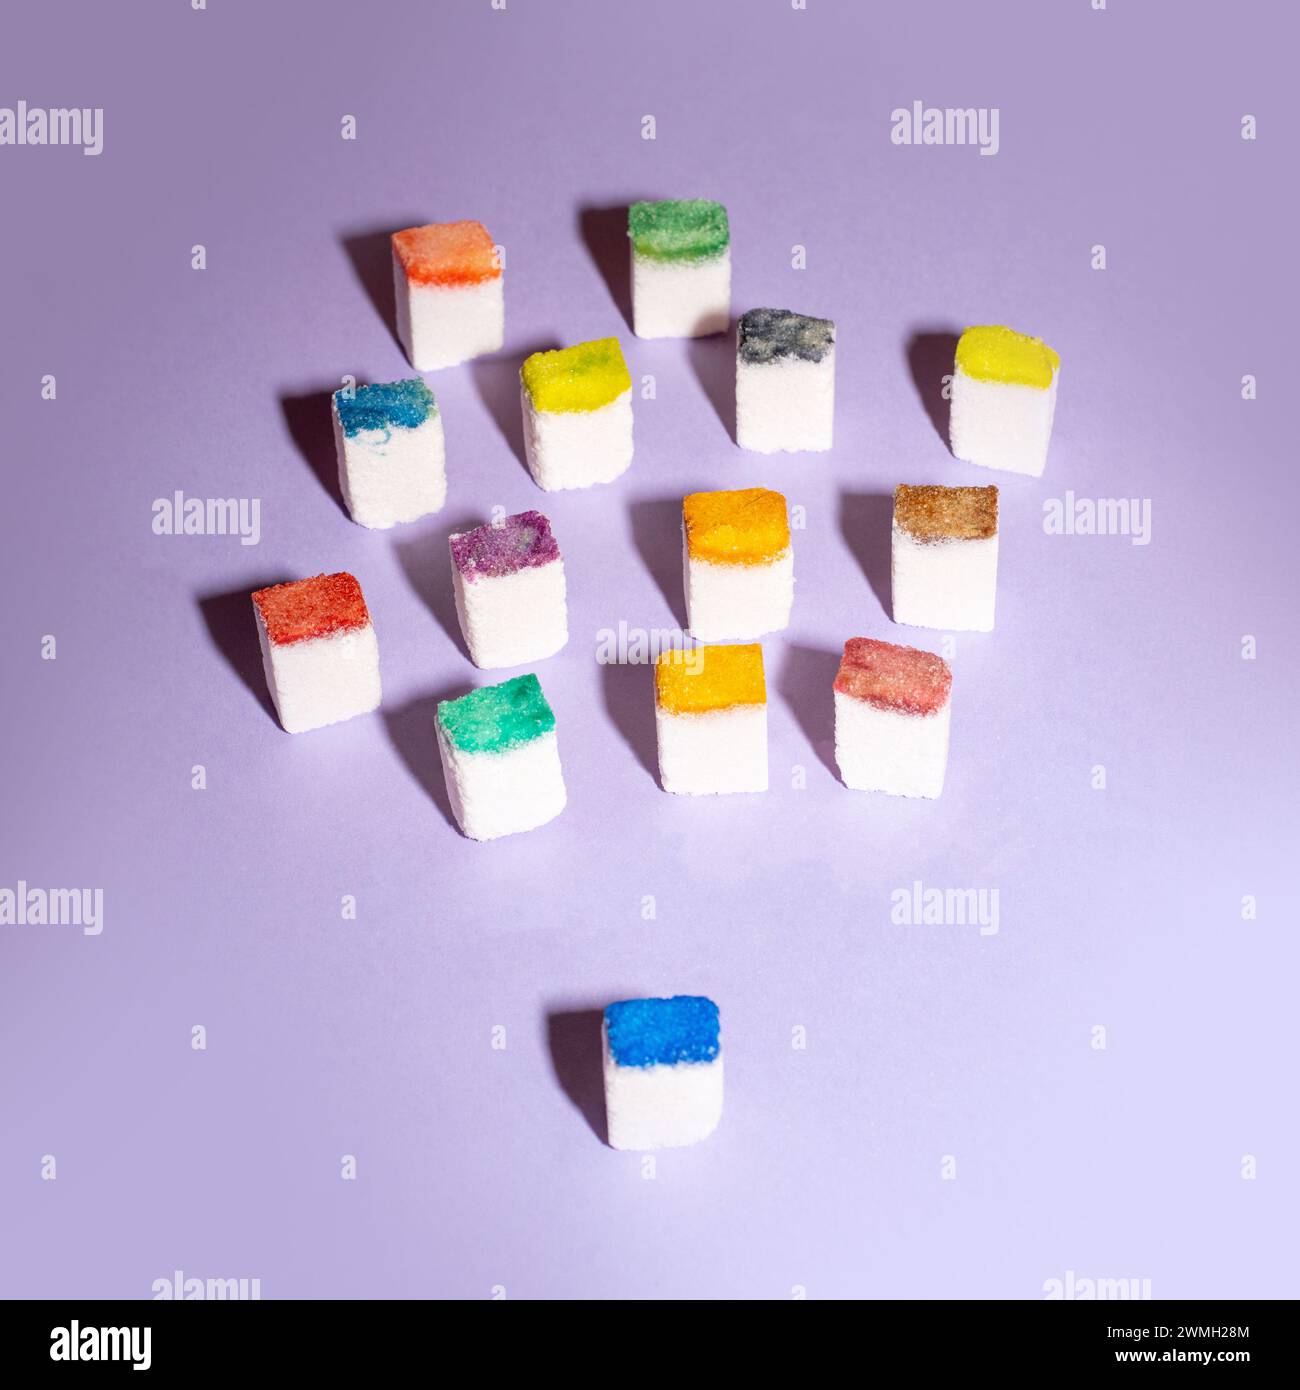 Colorful sugar cubes form a crowd on a purple background. People metaphor. Creative food concept. Stock Photo